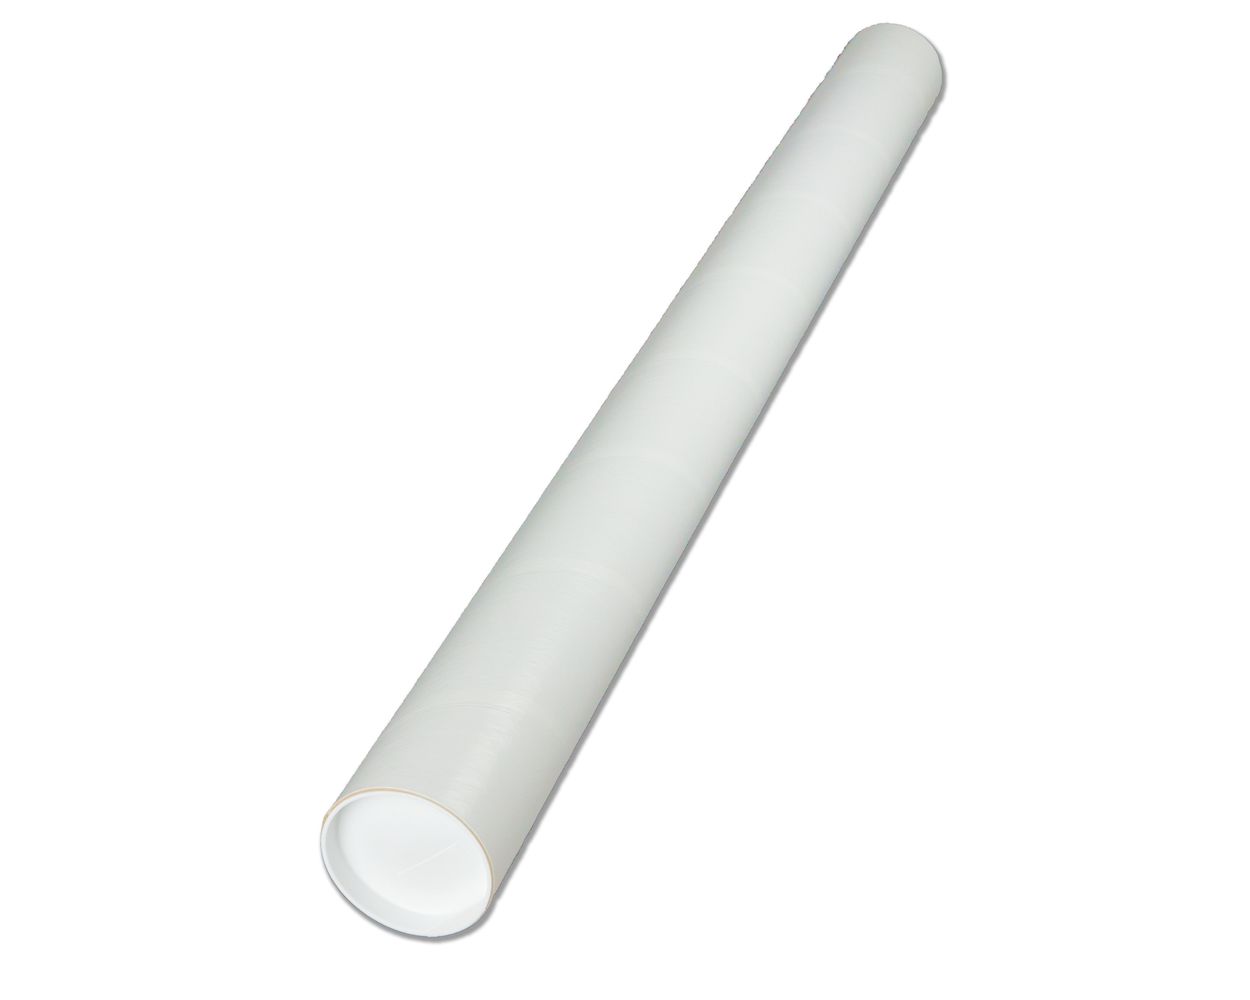 3 x 24 Mailing Tubes, Ideal for Shipping Items that Cannot be